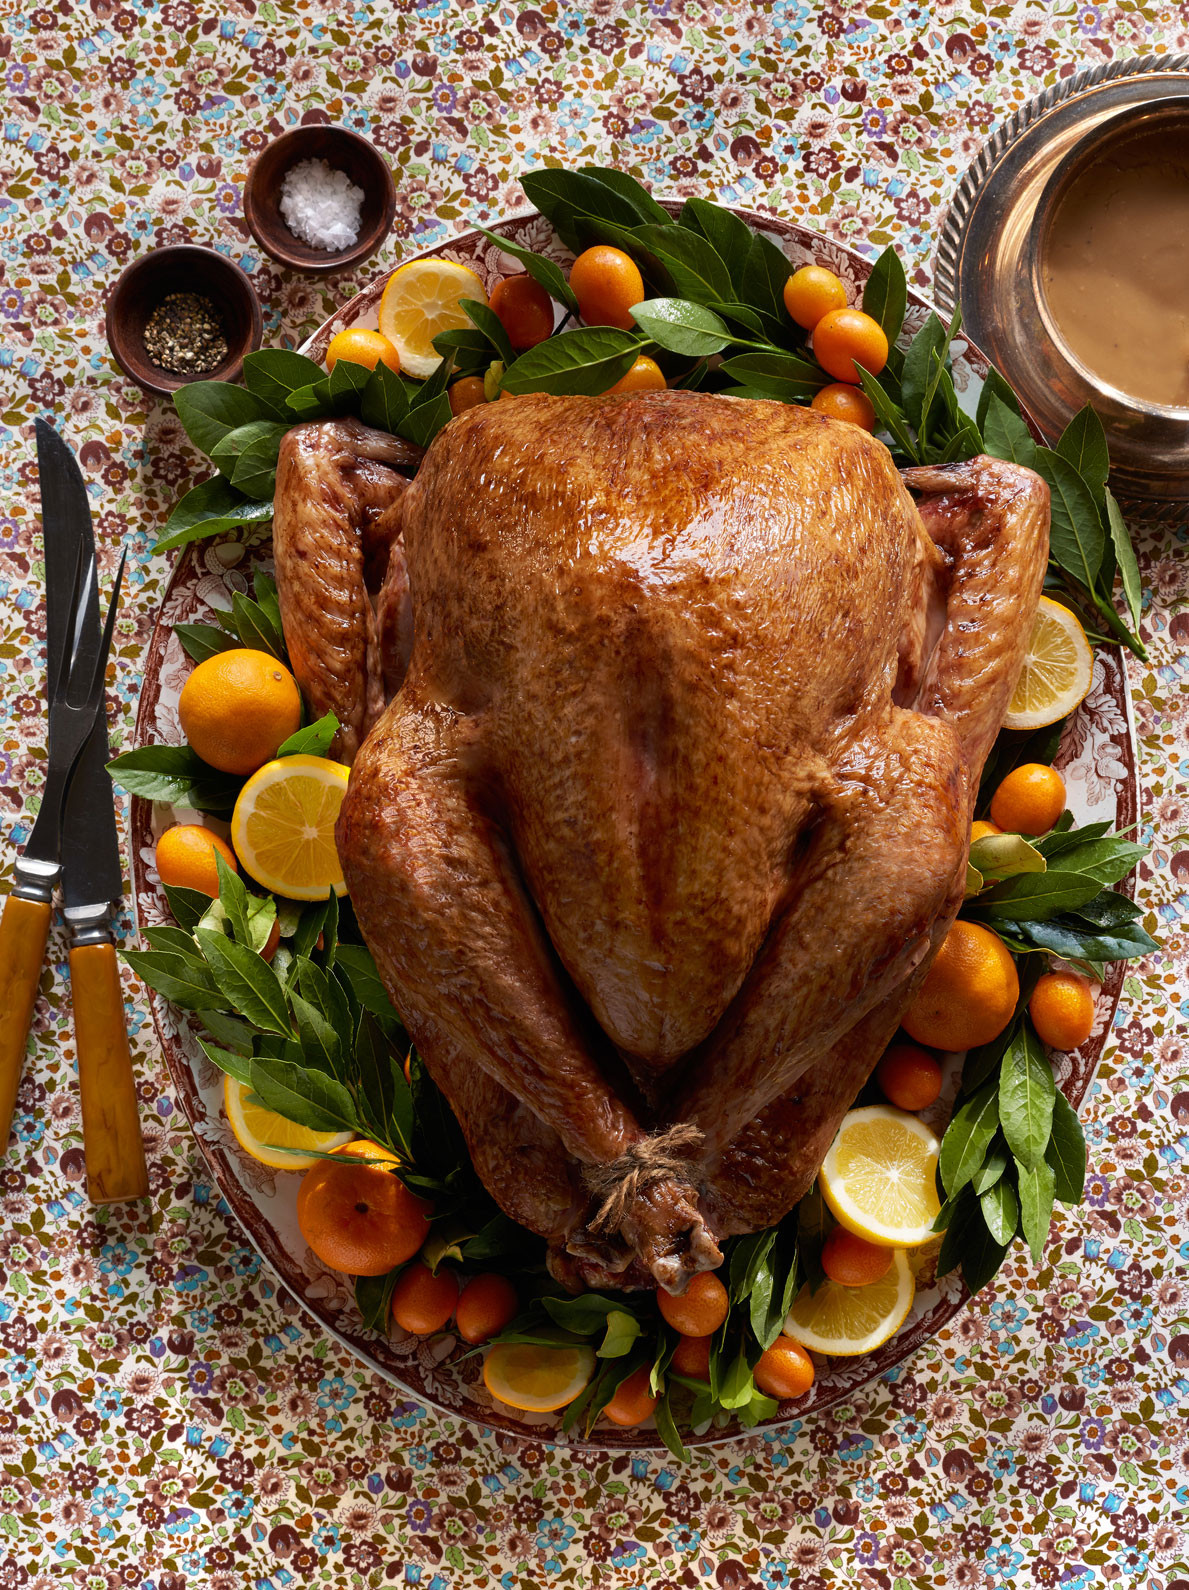 Picture Of Thanksgiving Turkey
 25 Best Thanksgiving Turkey Recipes How To Cook Turkey